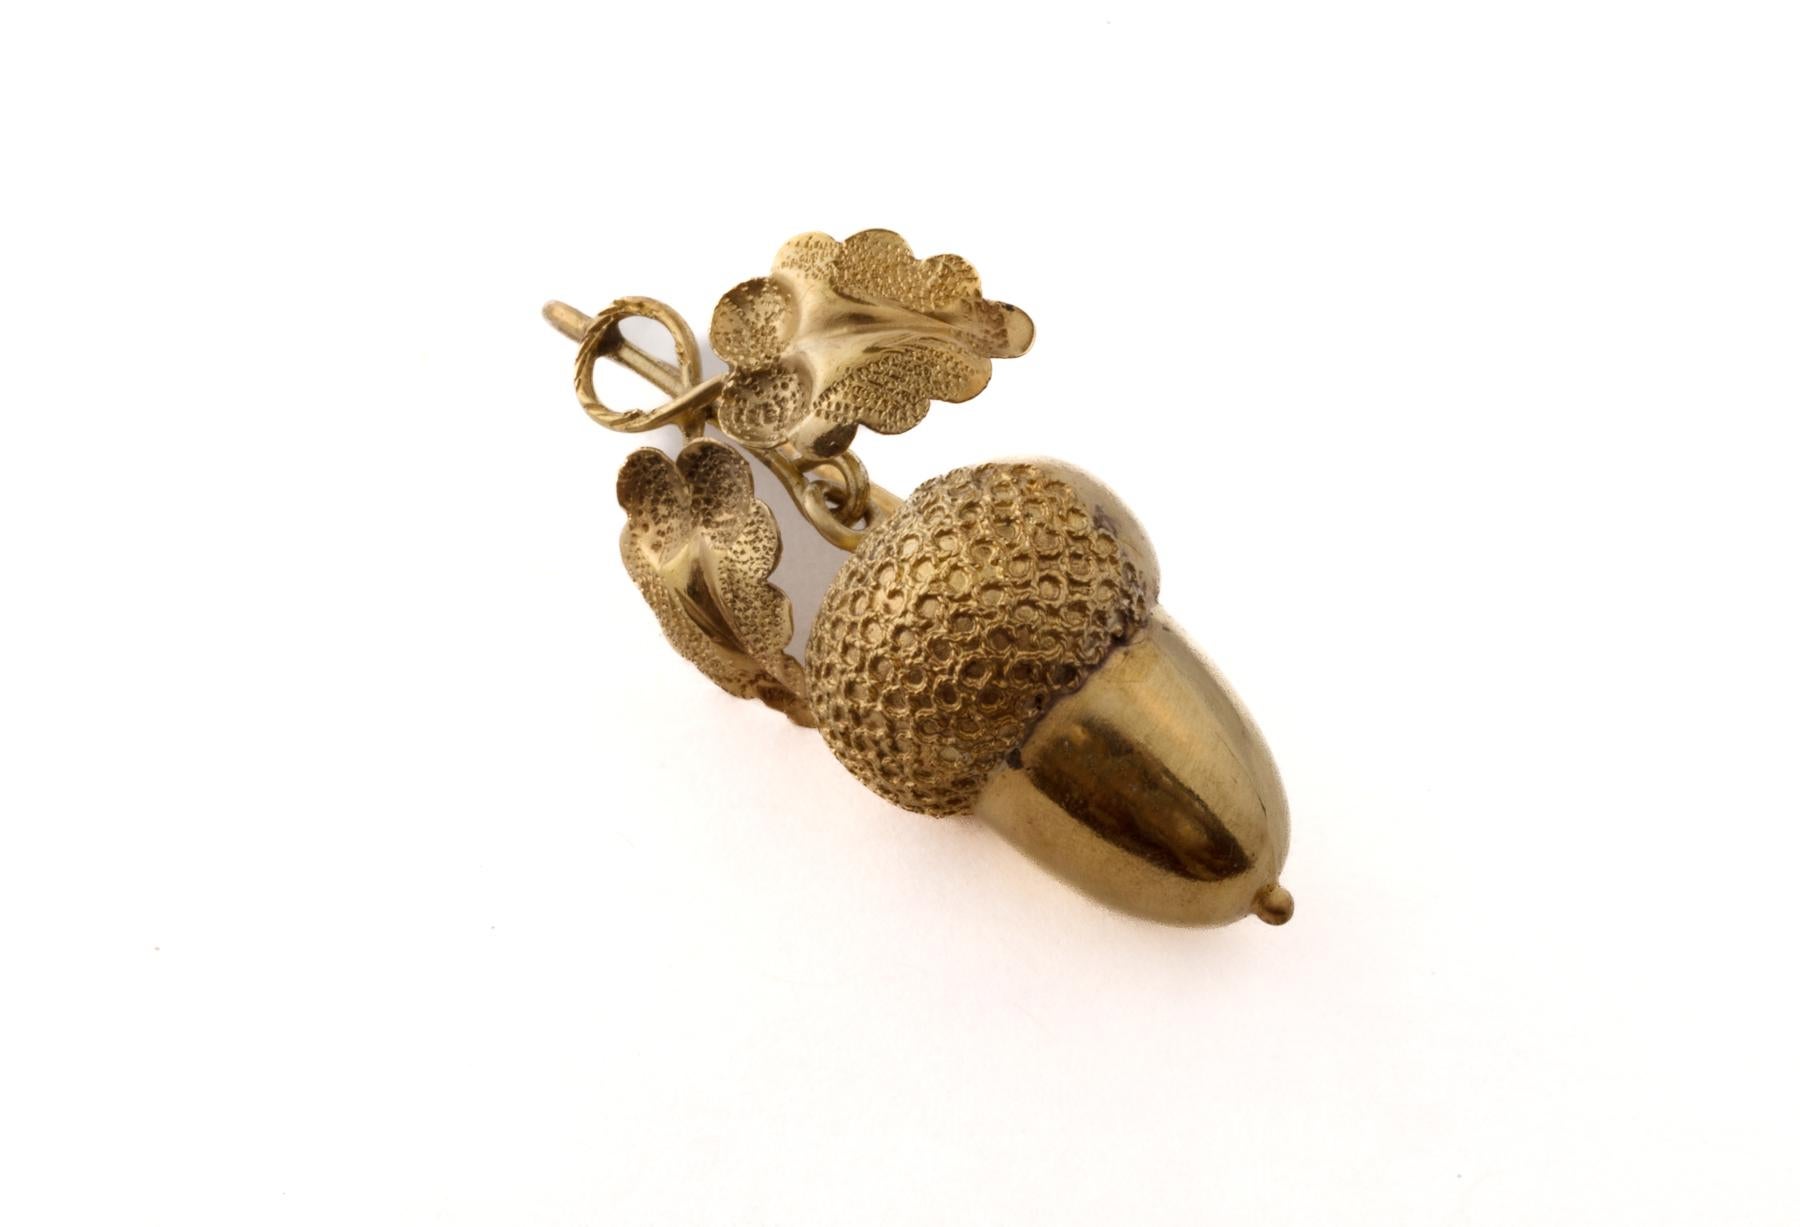 We have purchase a pair of 15kt gold Acorn earrings which are extremely difficult to find now. I gasp at the price I had to pay and hope you understand that I offer them at the best price I can to make some profit. These little acorns are light in